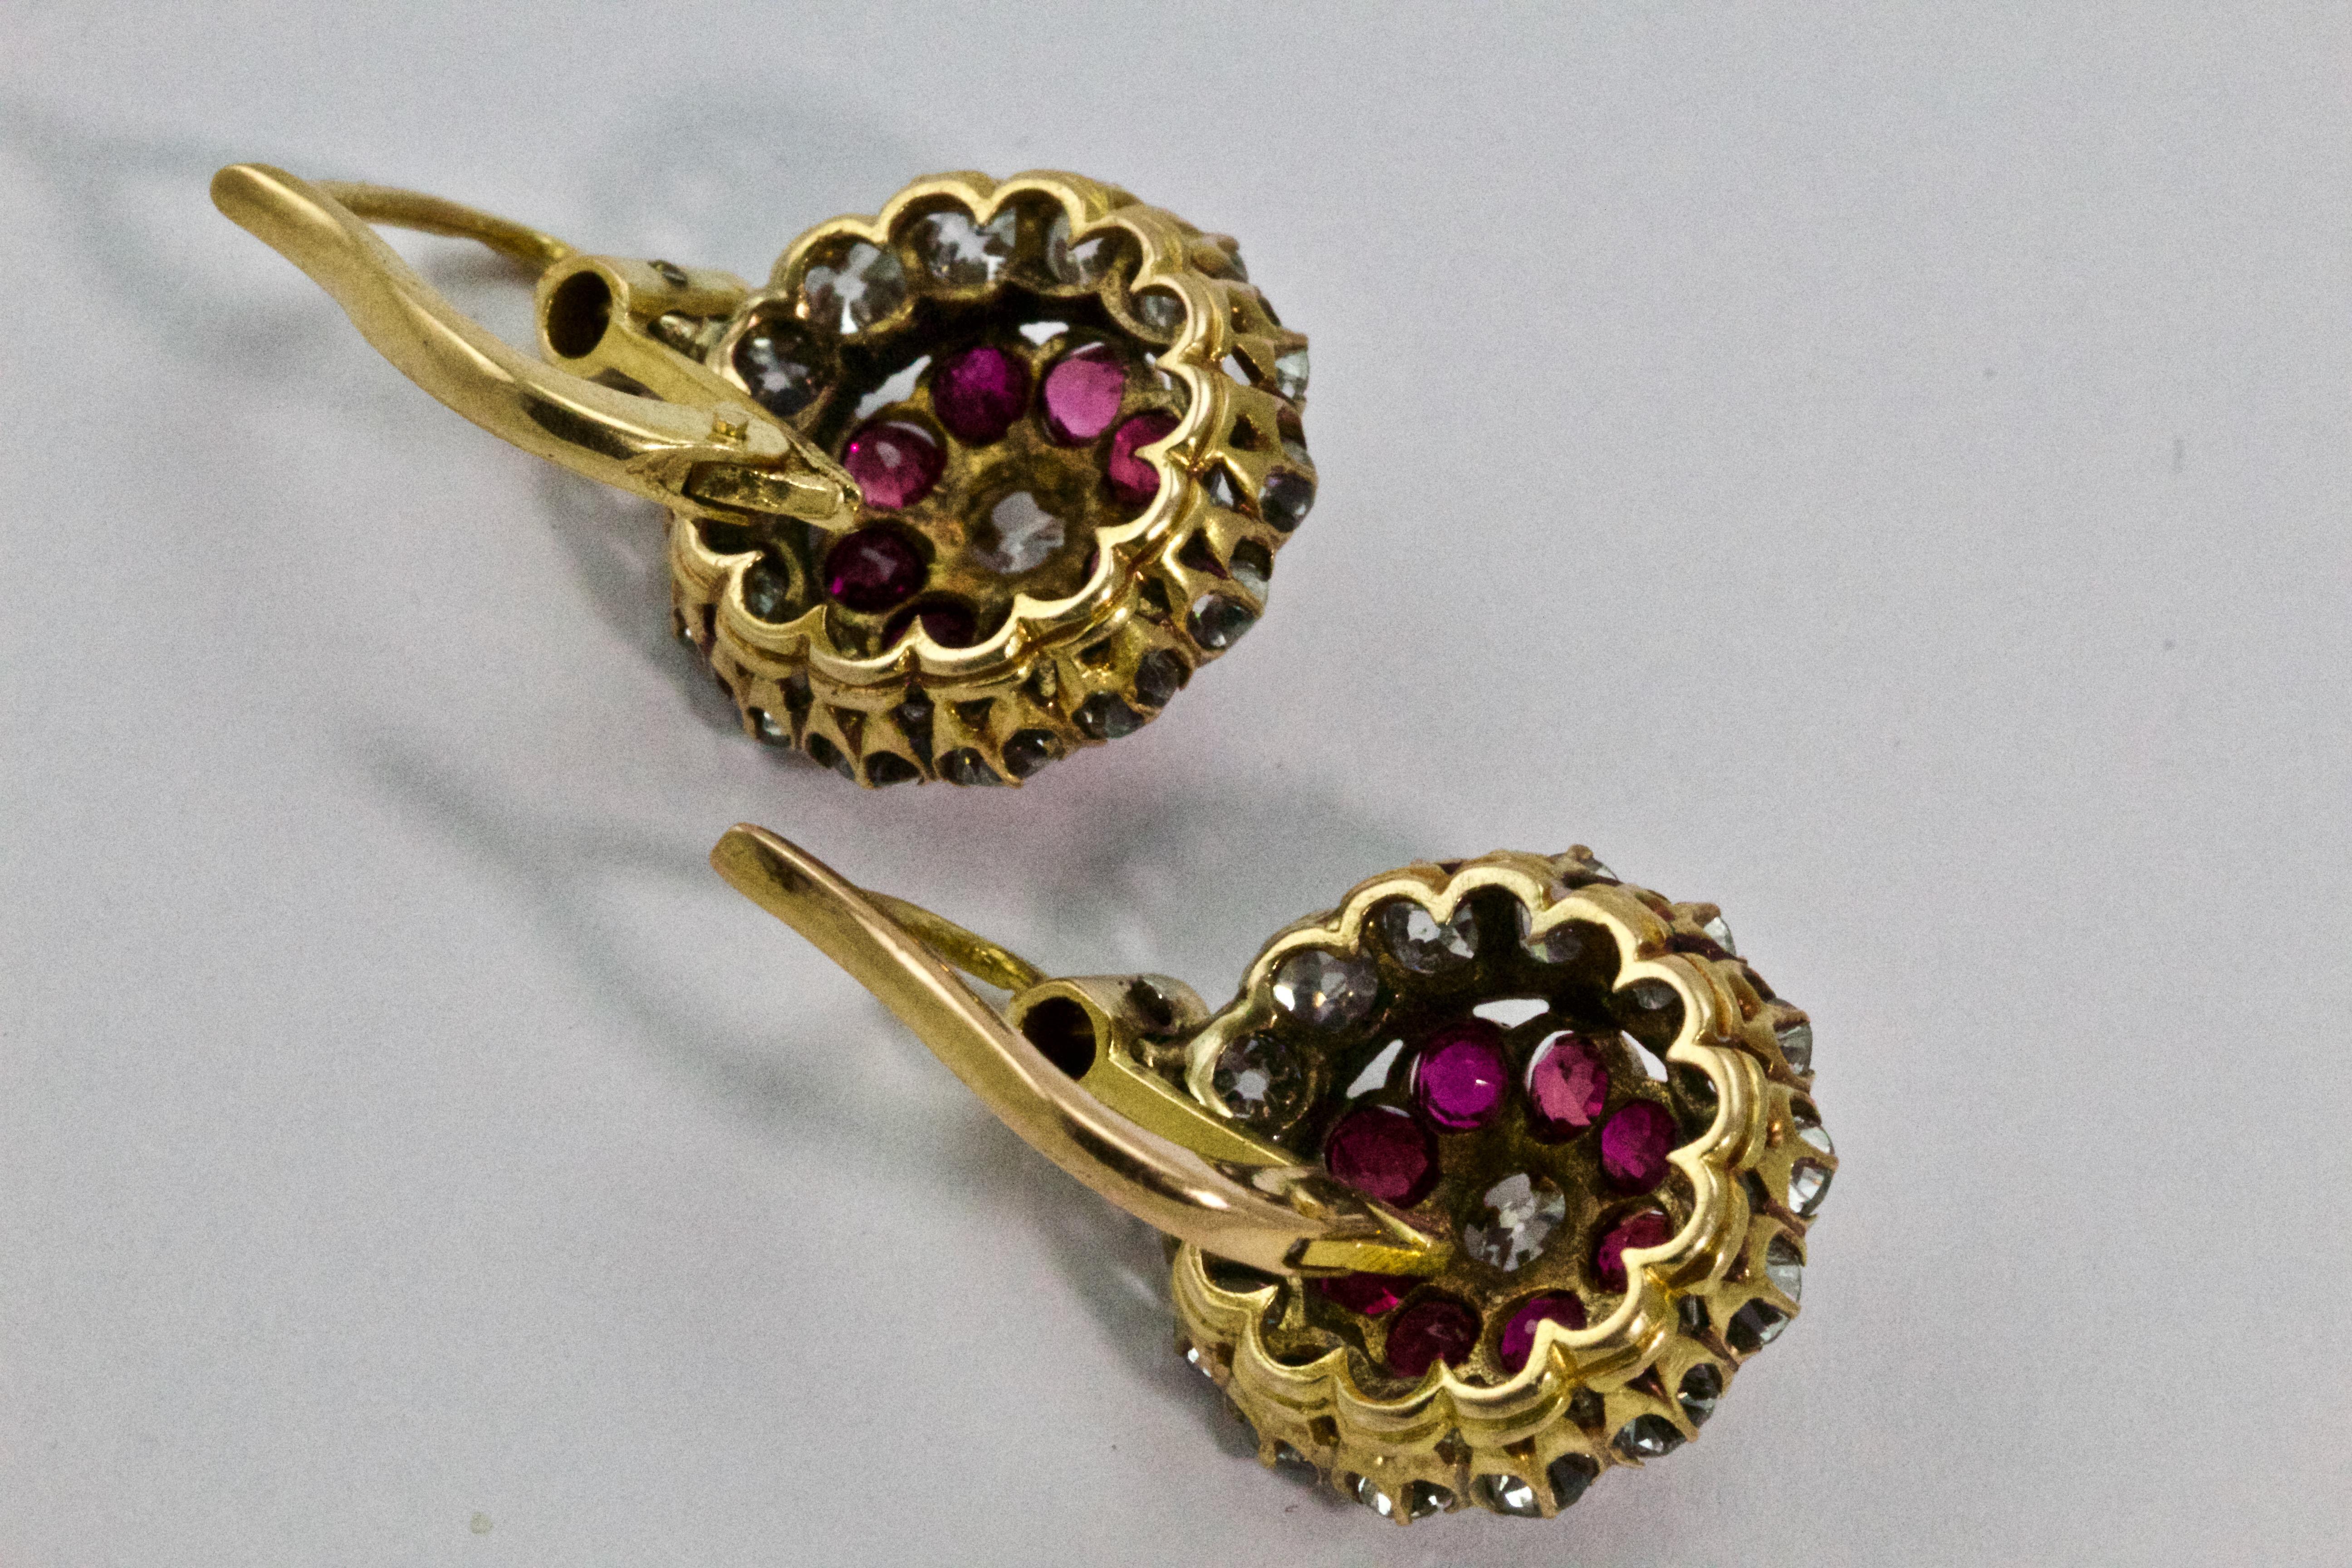 This magnificent pair of earrings are circa 1900 and modelled in 18 karat gold throughout. The central old European cut diamonds are claw set surrounded by a delightful halo of natural rubies and a further halo of diamonds. Each drop is suspended